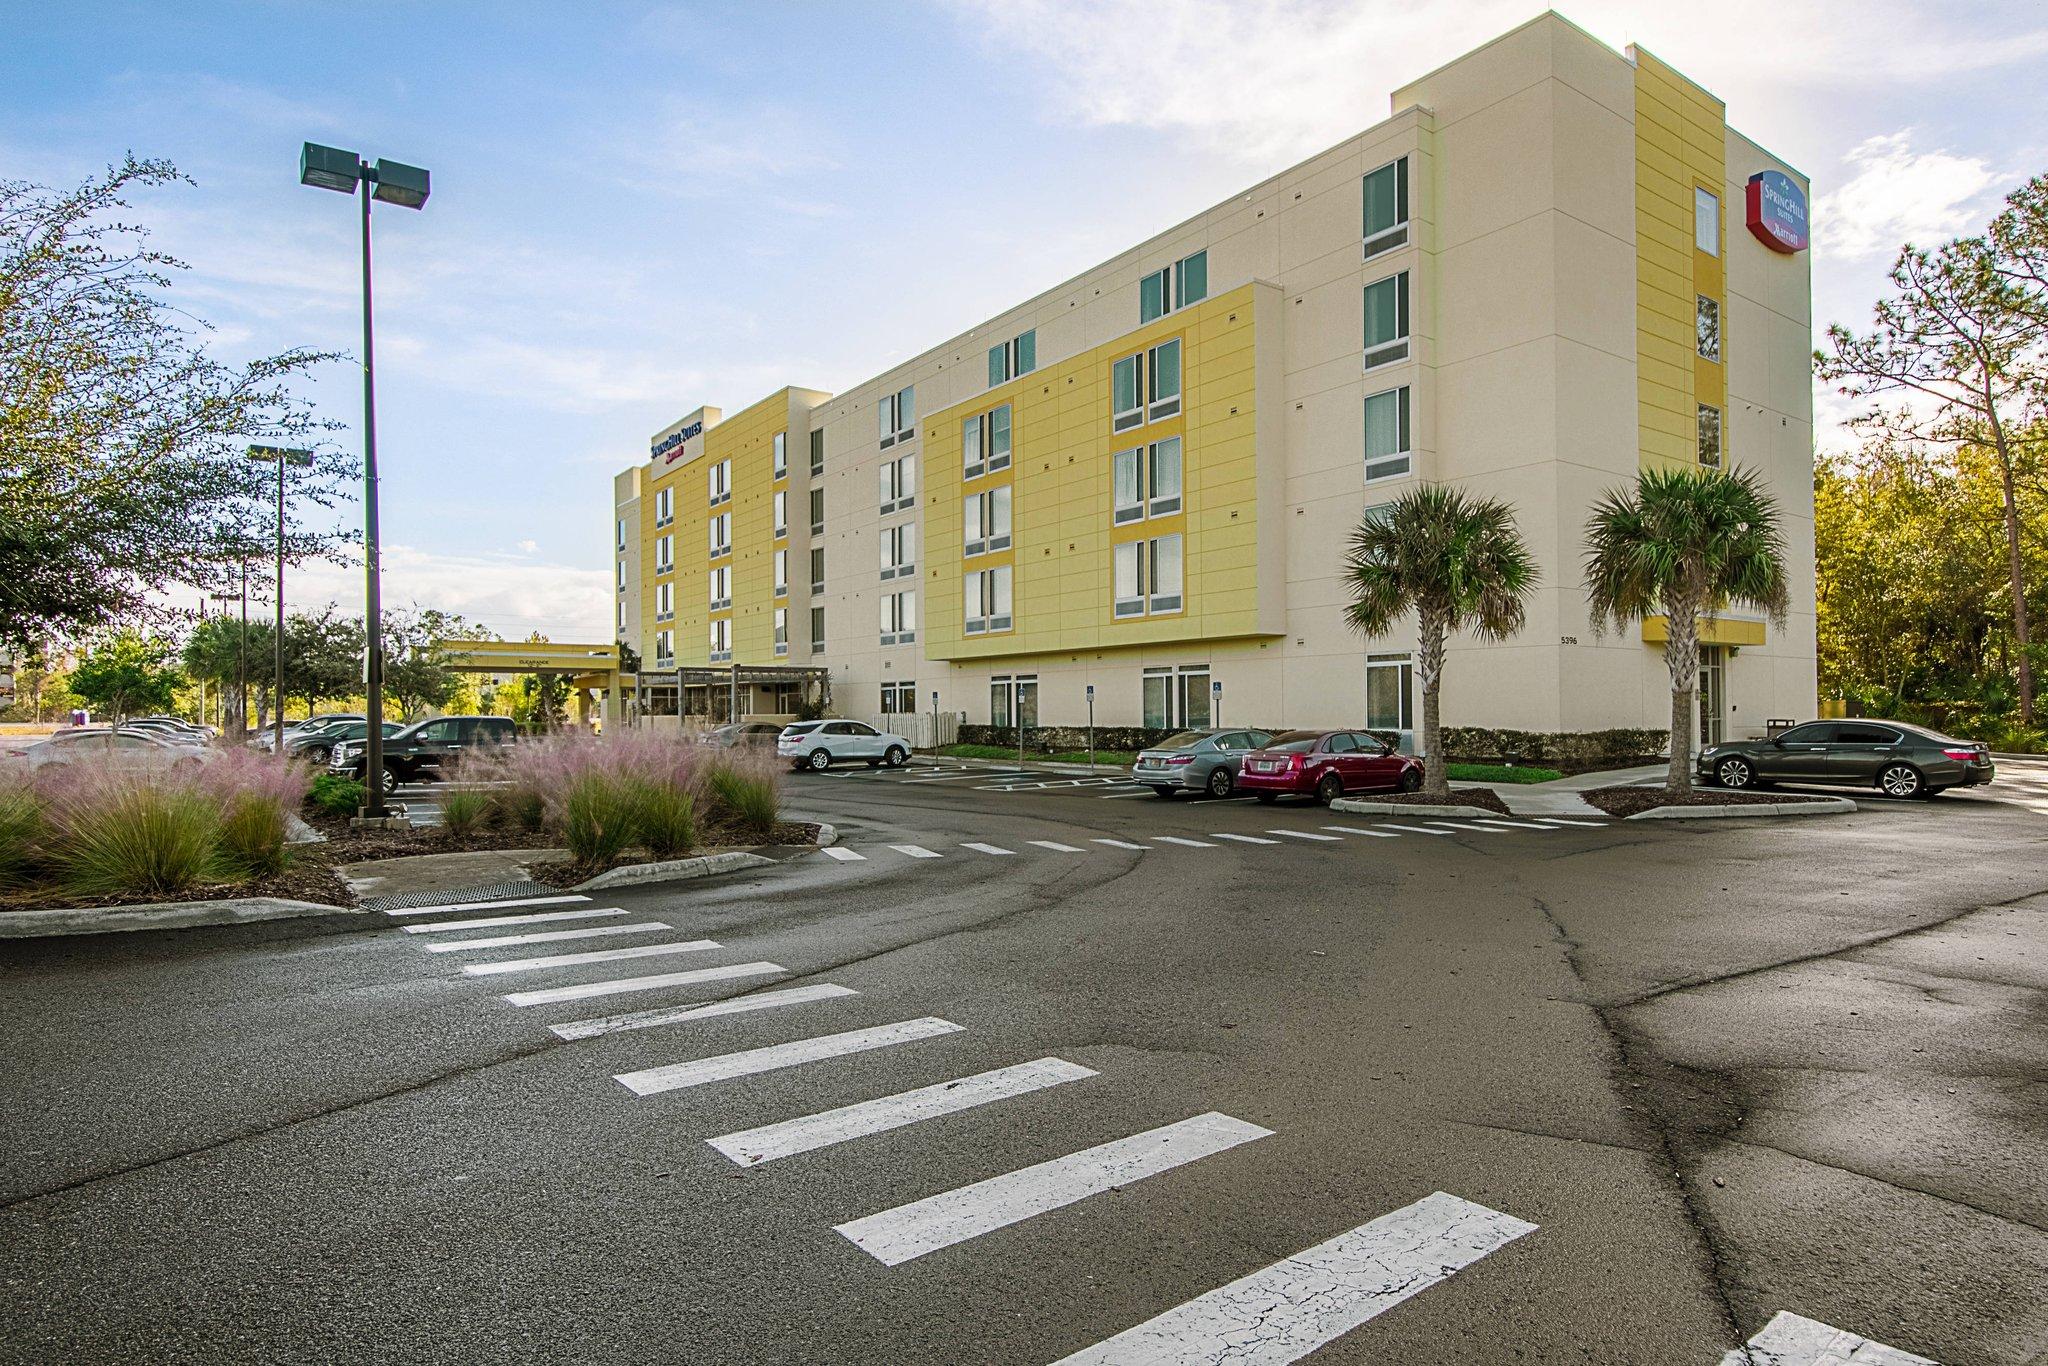 SpringHill Suites Tampa North/I-75 Tampa Palms in Tampa, FL